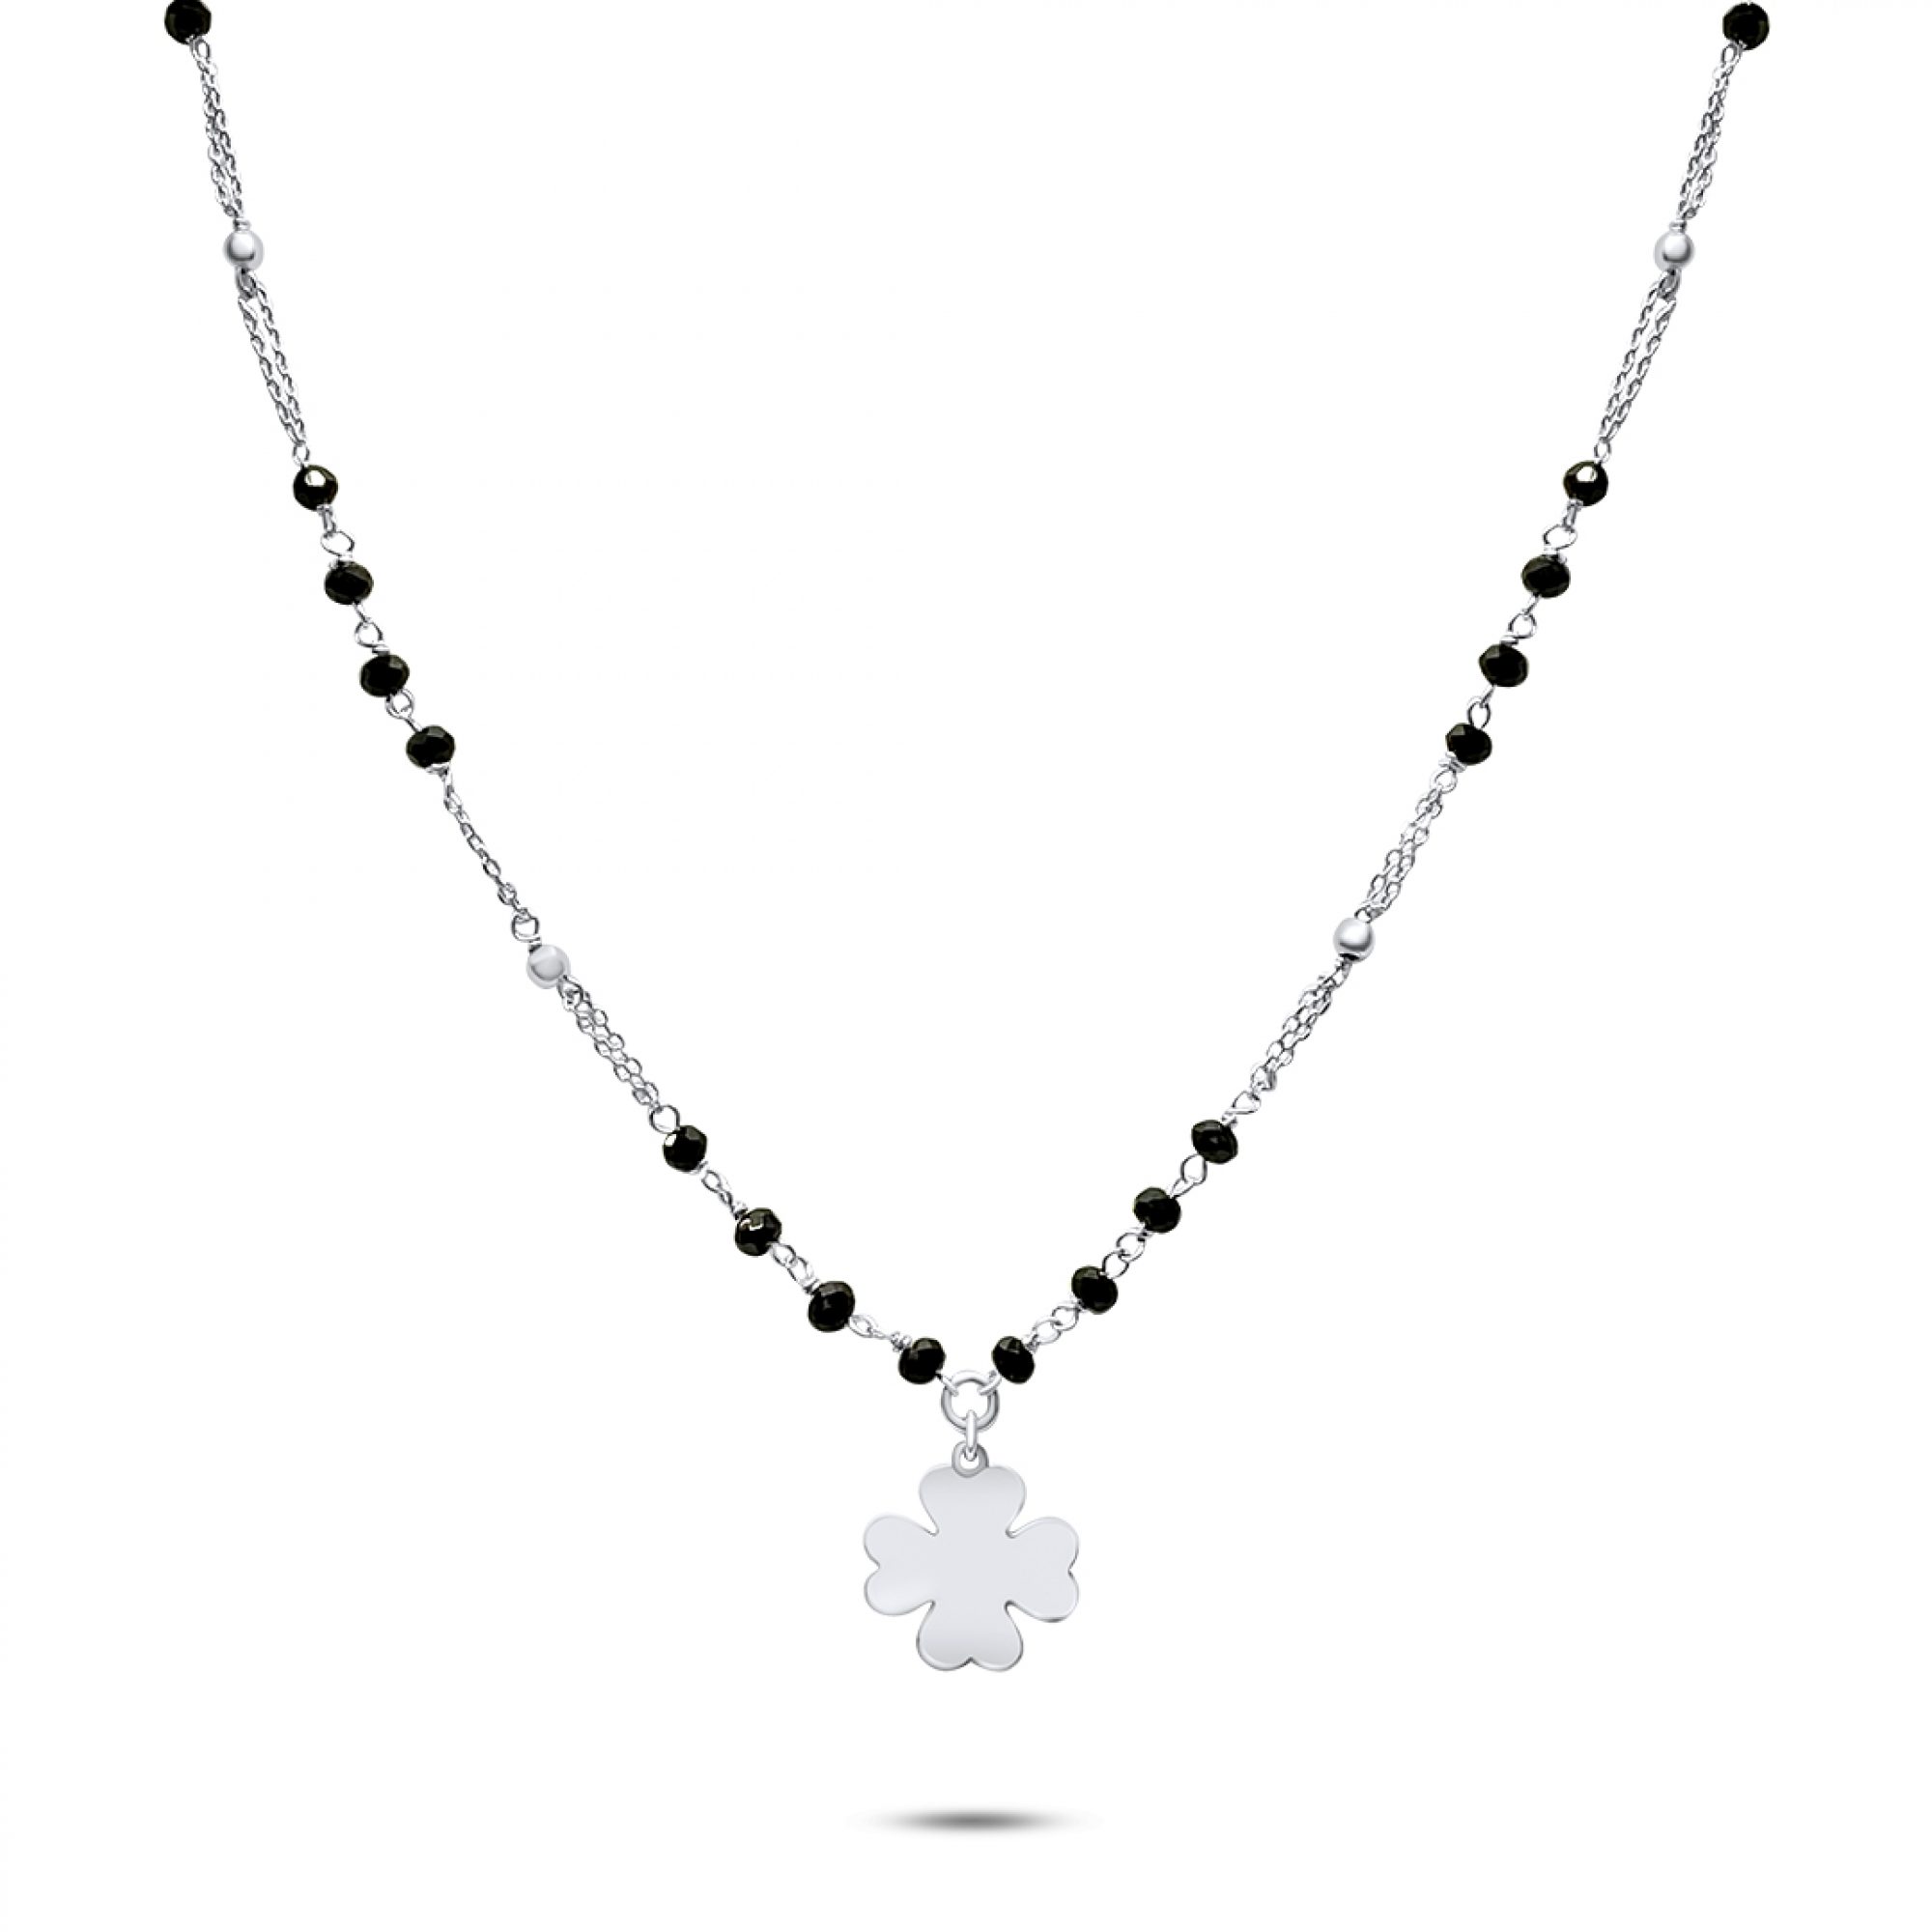 Four leaf clover necklace with beads